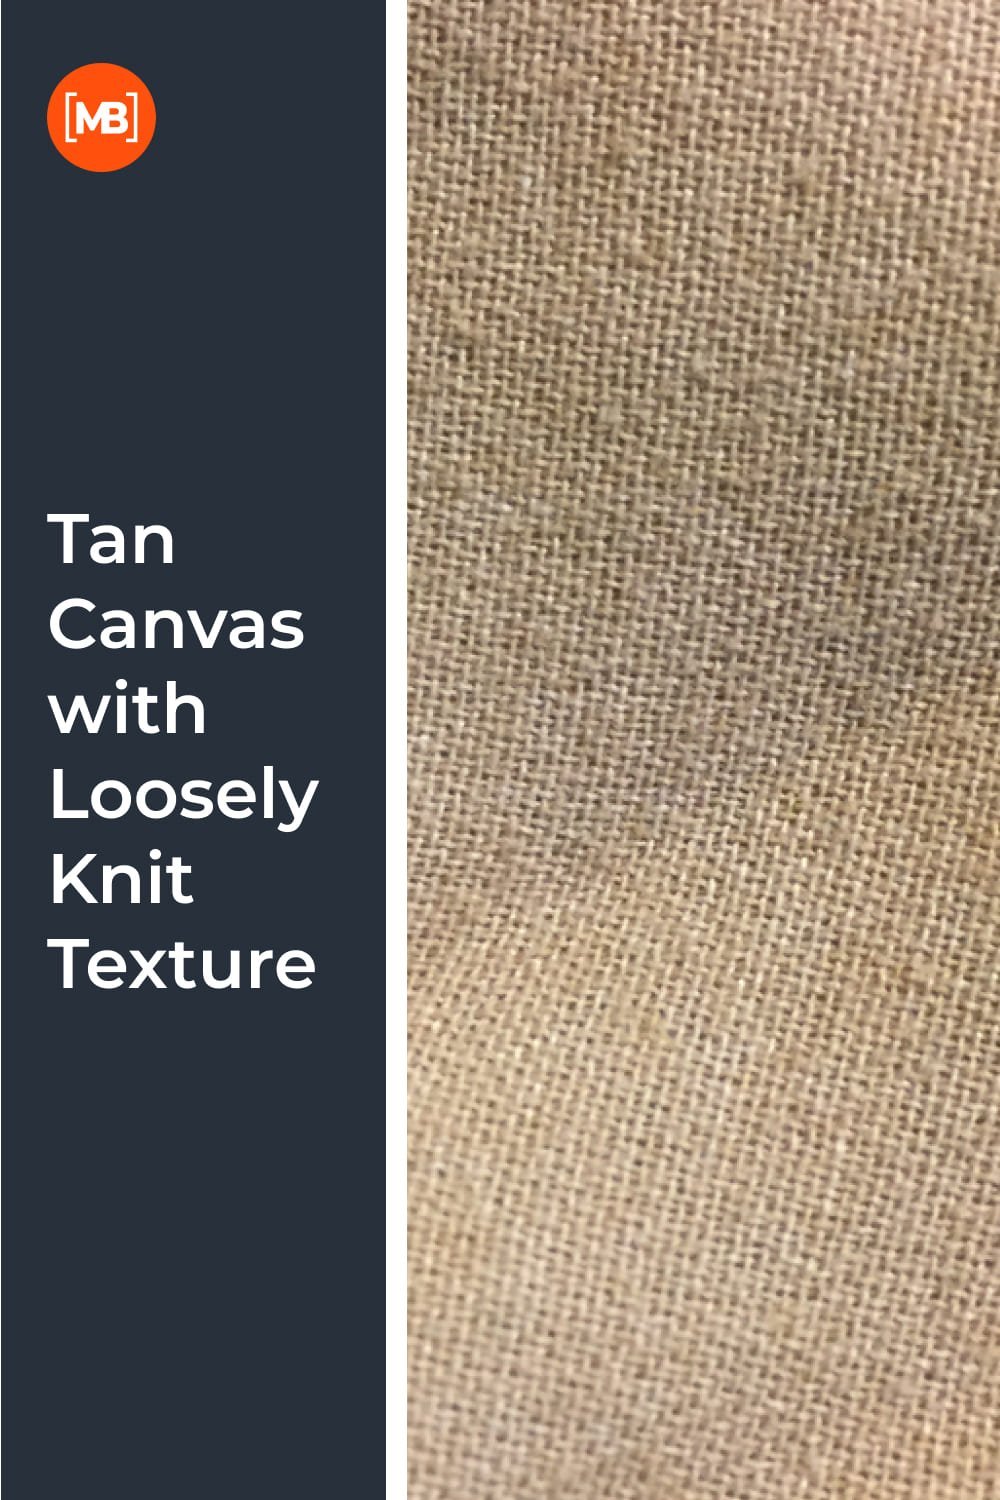 Tan canvas with loosely knit texture.